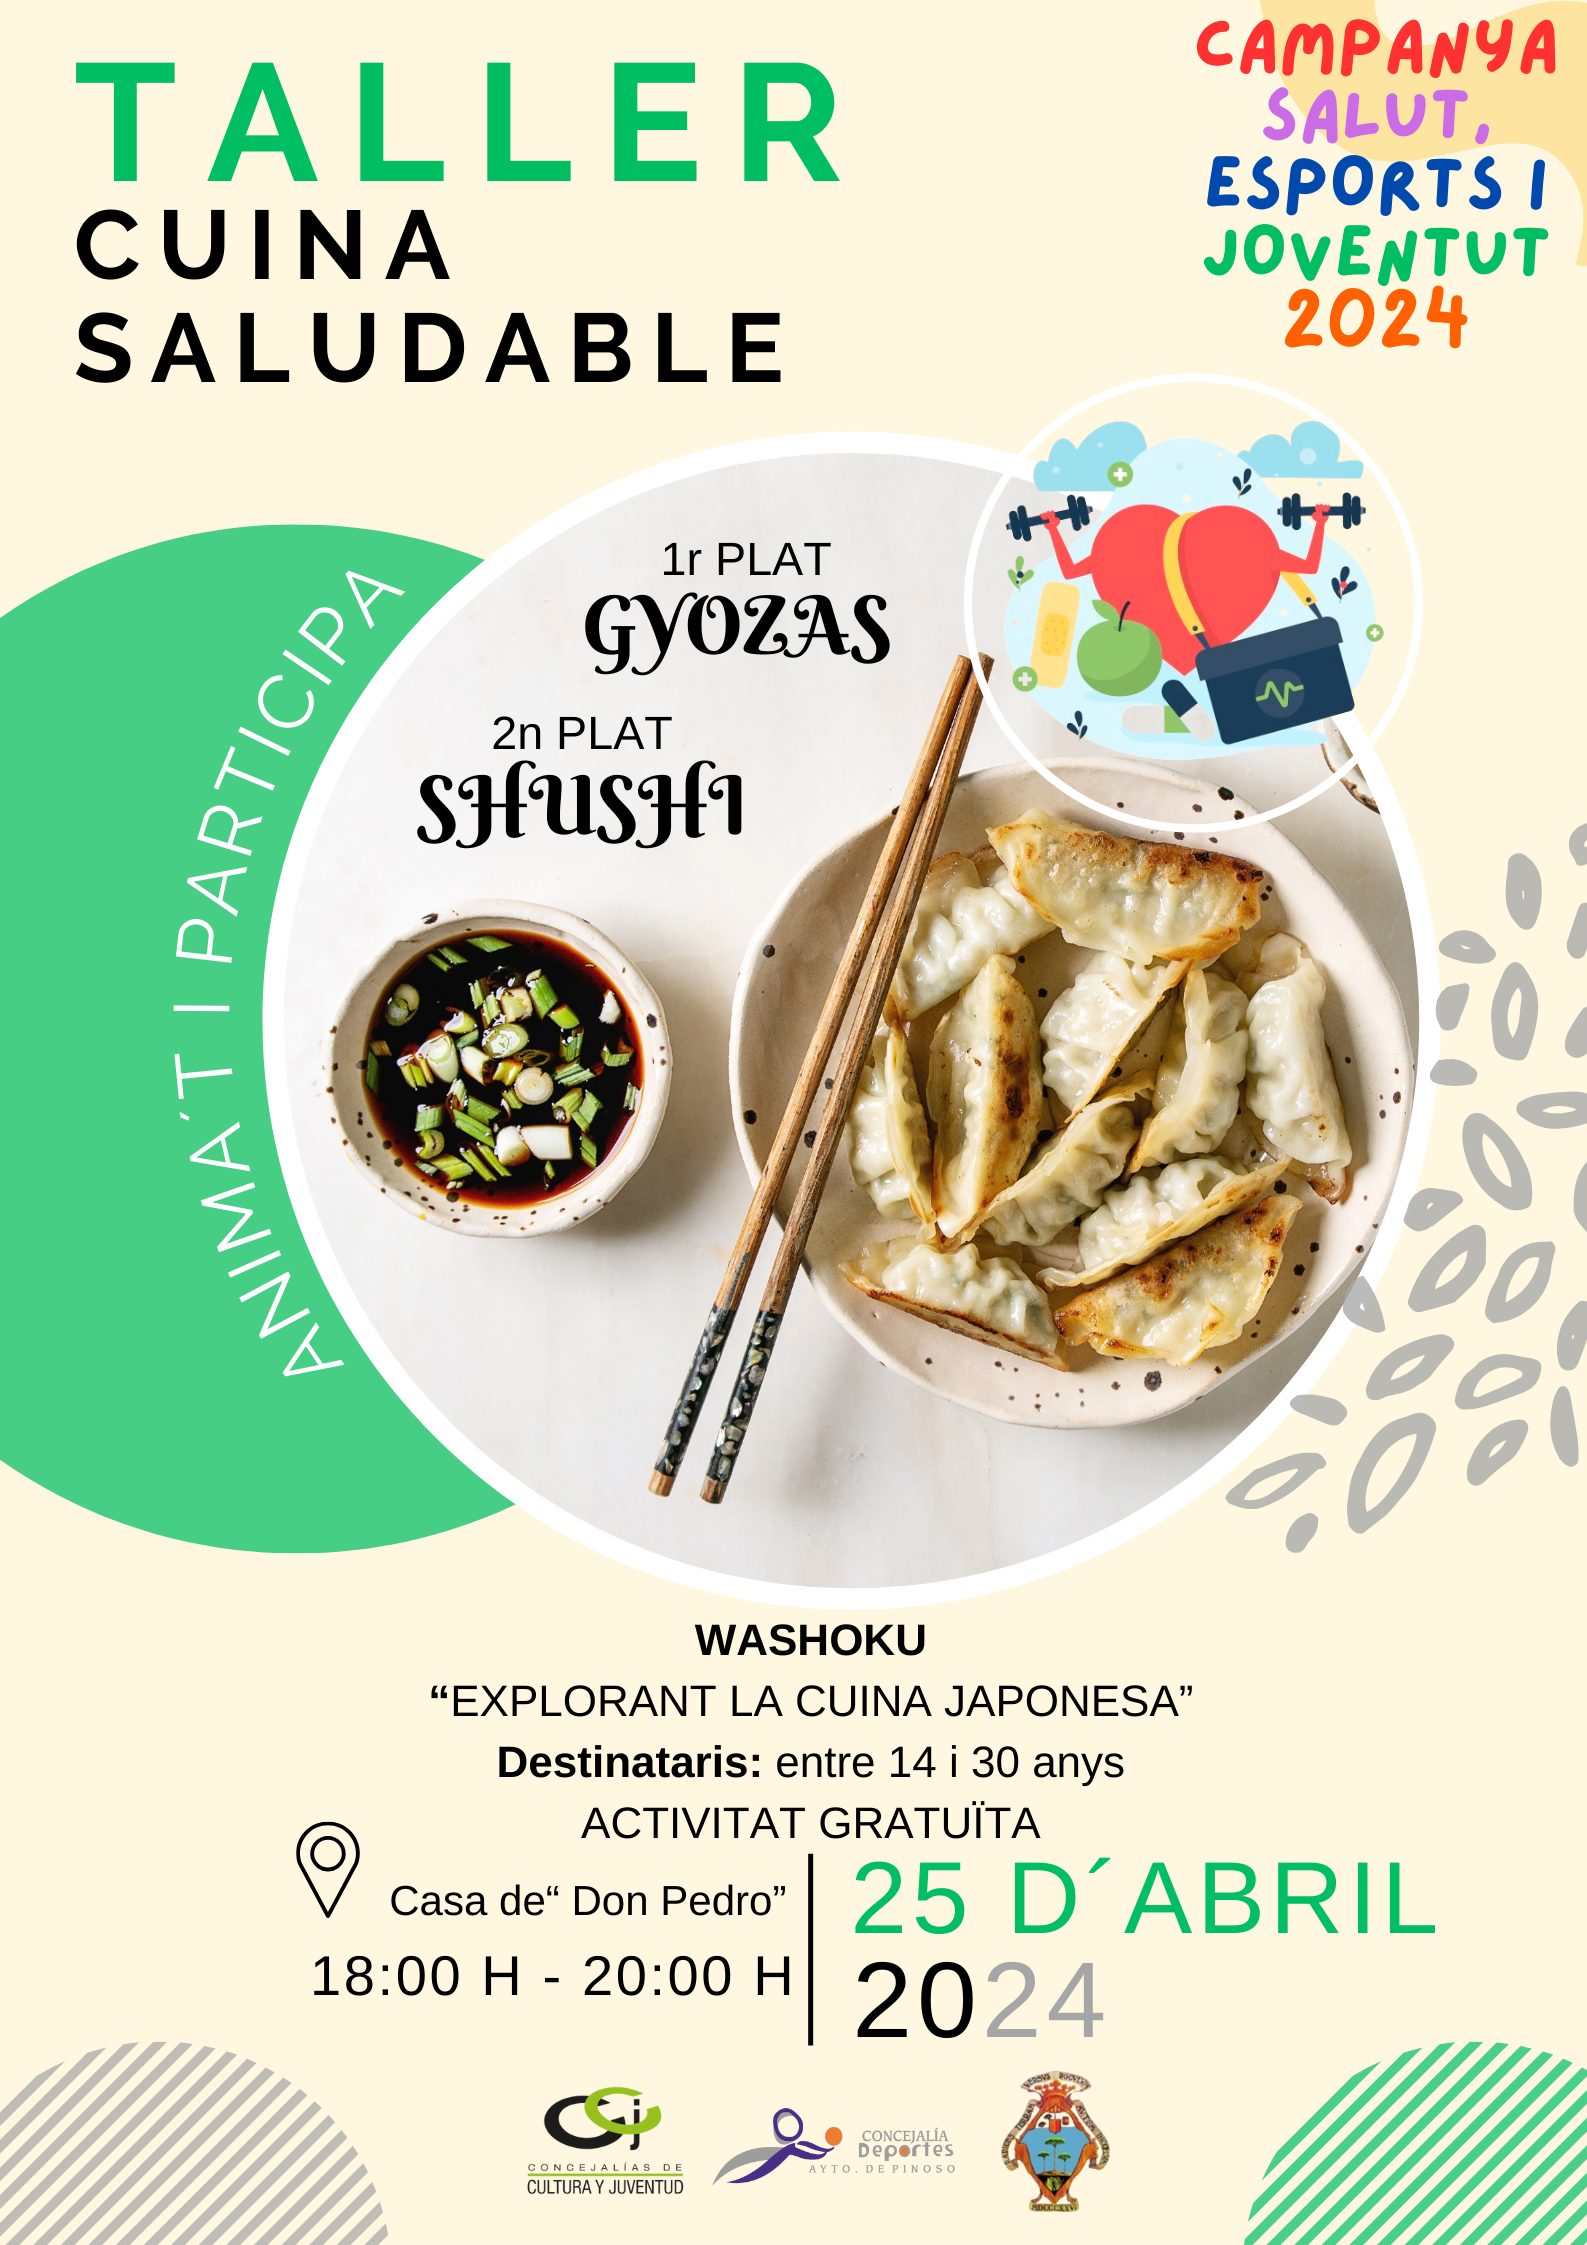 TALLER CUINA SALUDABLE